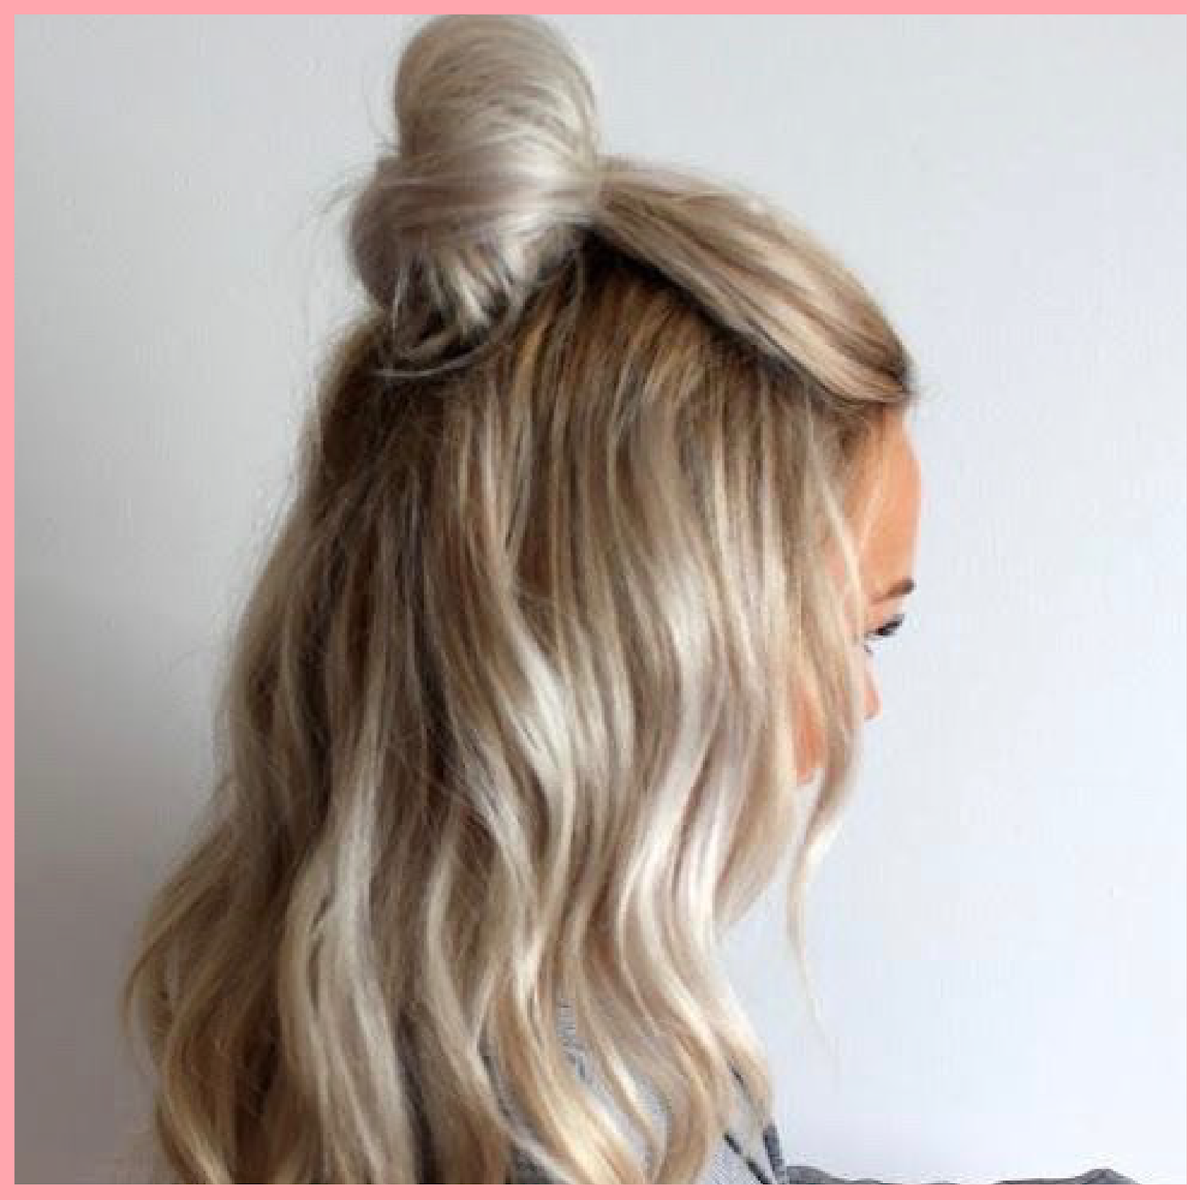 Top Knot